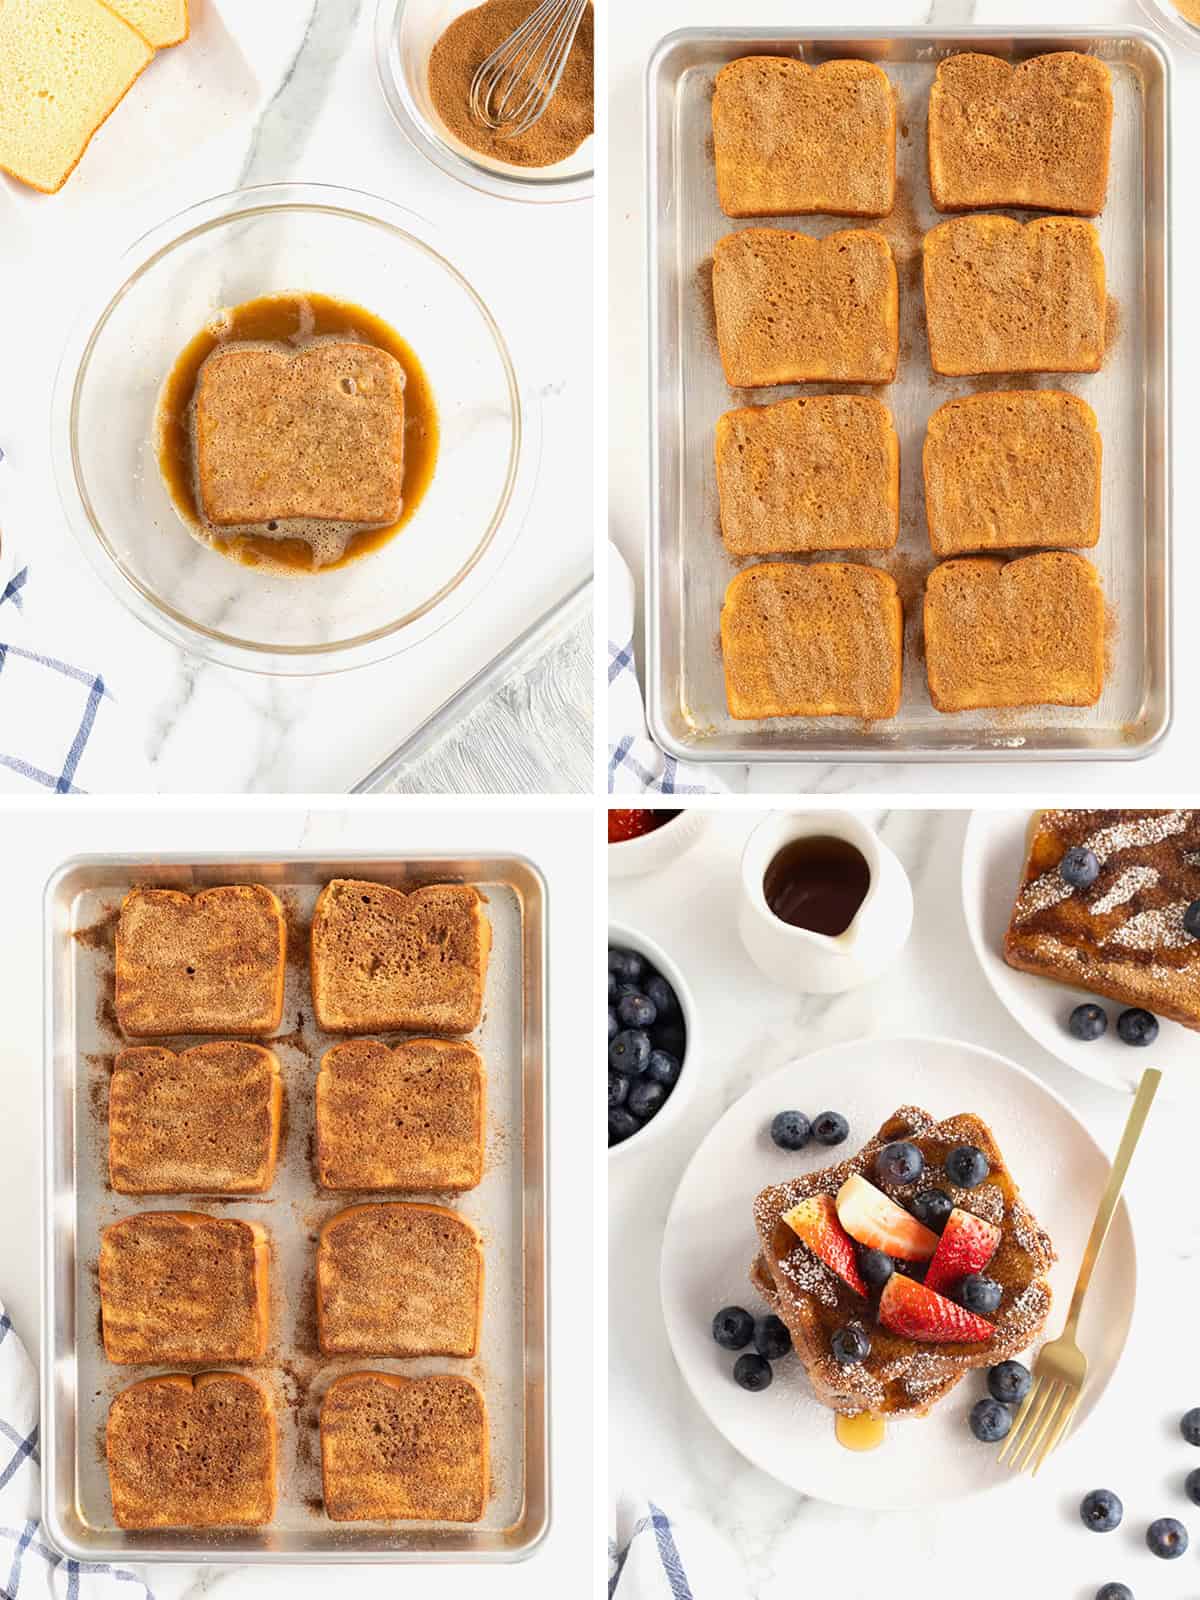 Steps to make baked French toast.